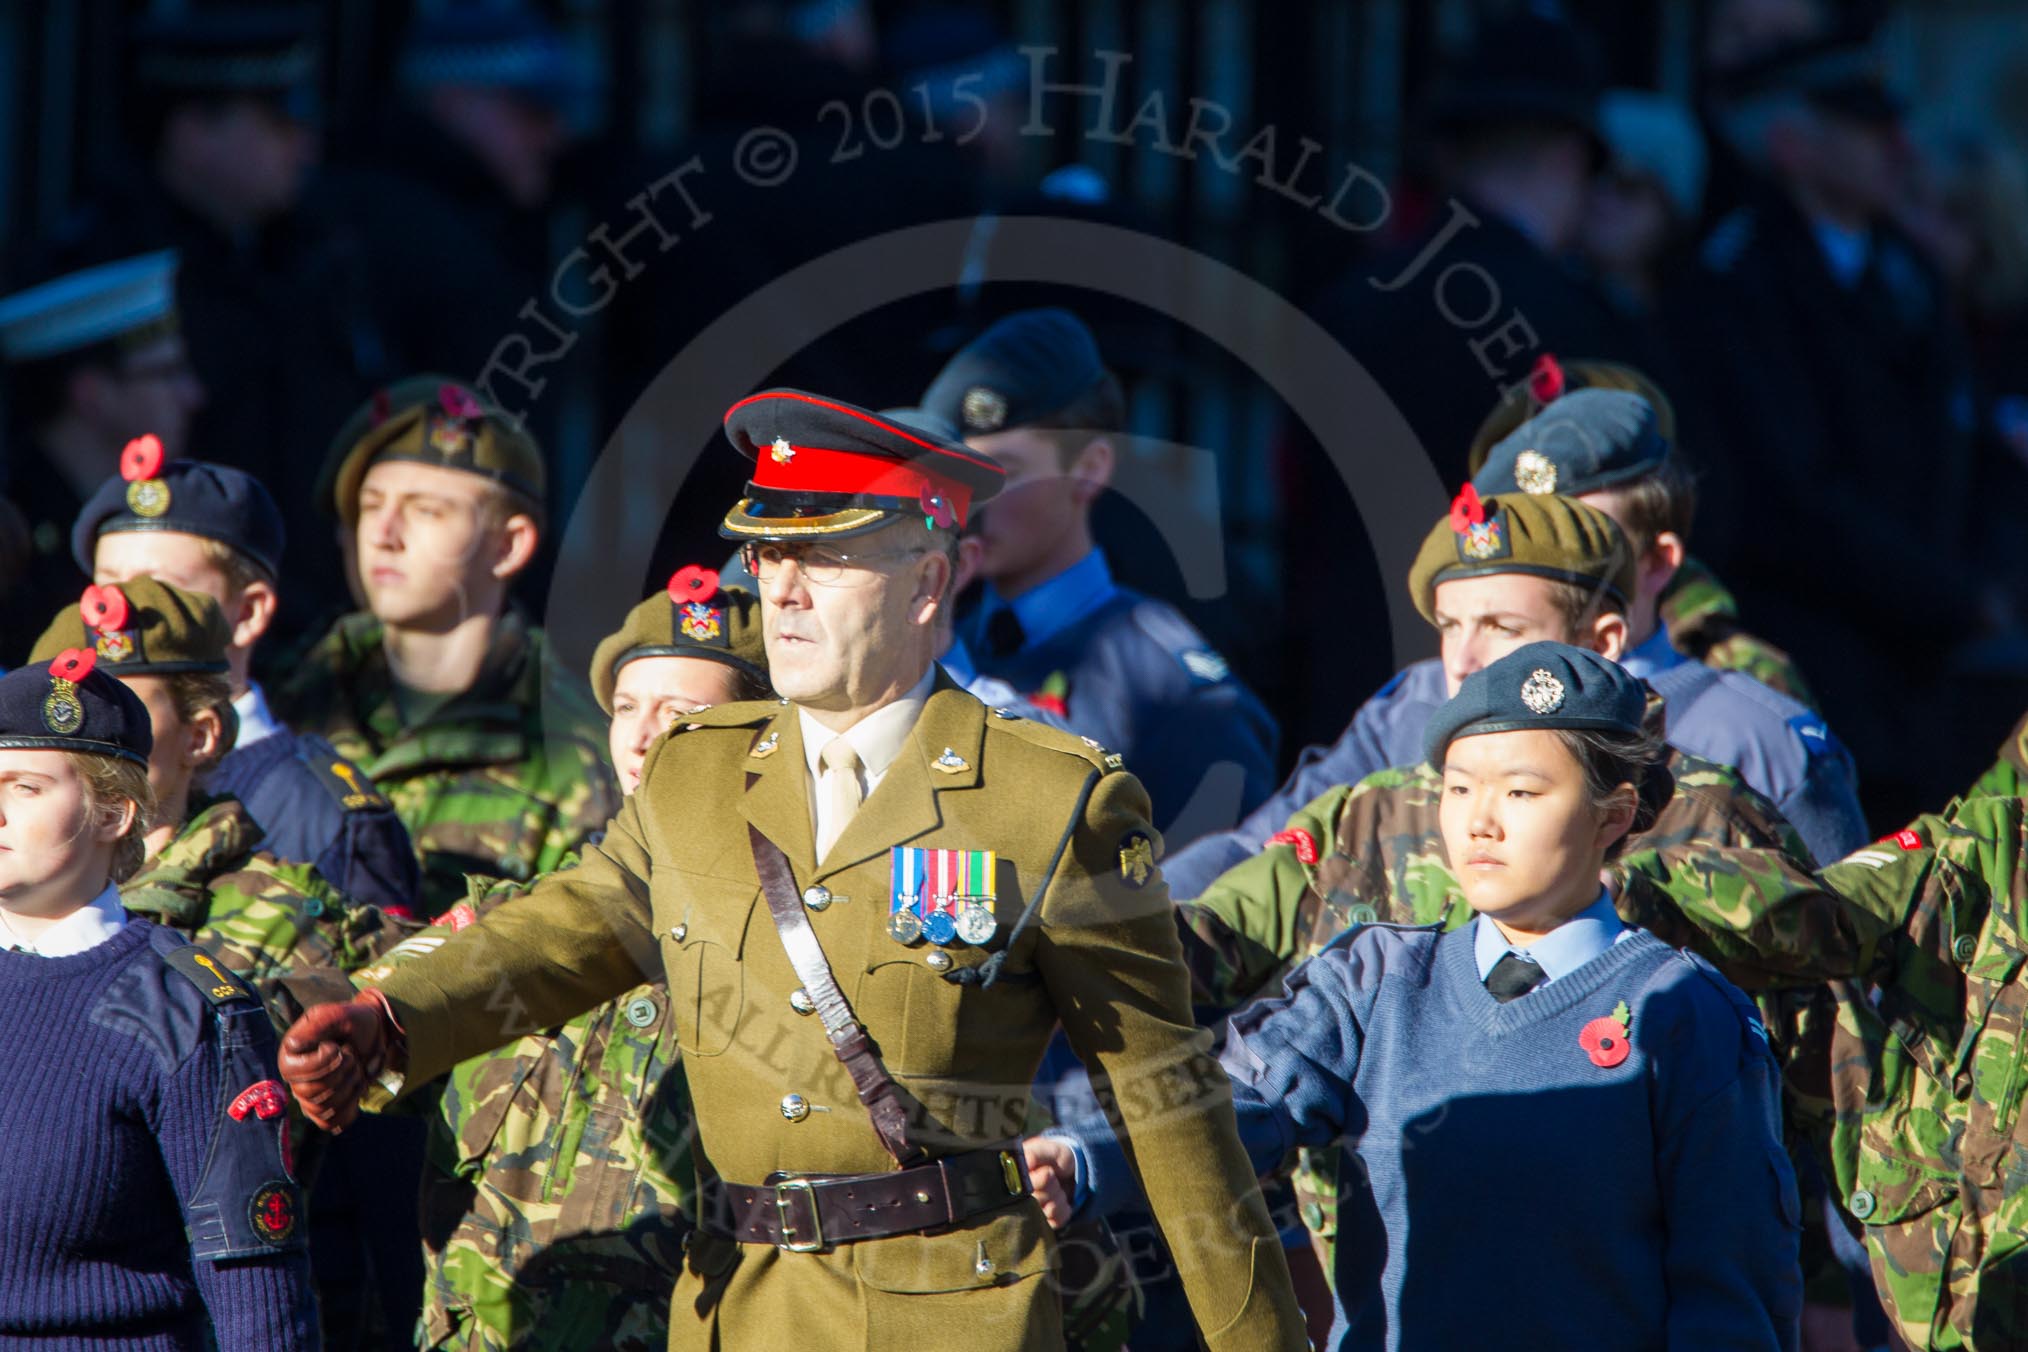 Remembrance Sunday Cenotaph March Past 2013: M46 - Combined Cadet Force..
Press stand opposite the Foreign Office building, Whitehall, London SW1,
London,
Greater London,
United Kingdom,
on 10 November 2013 at 12:14, image #2223